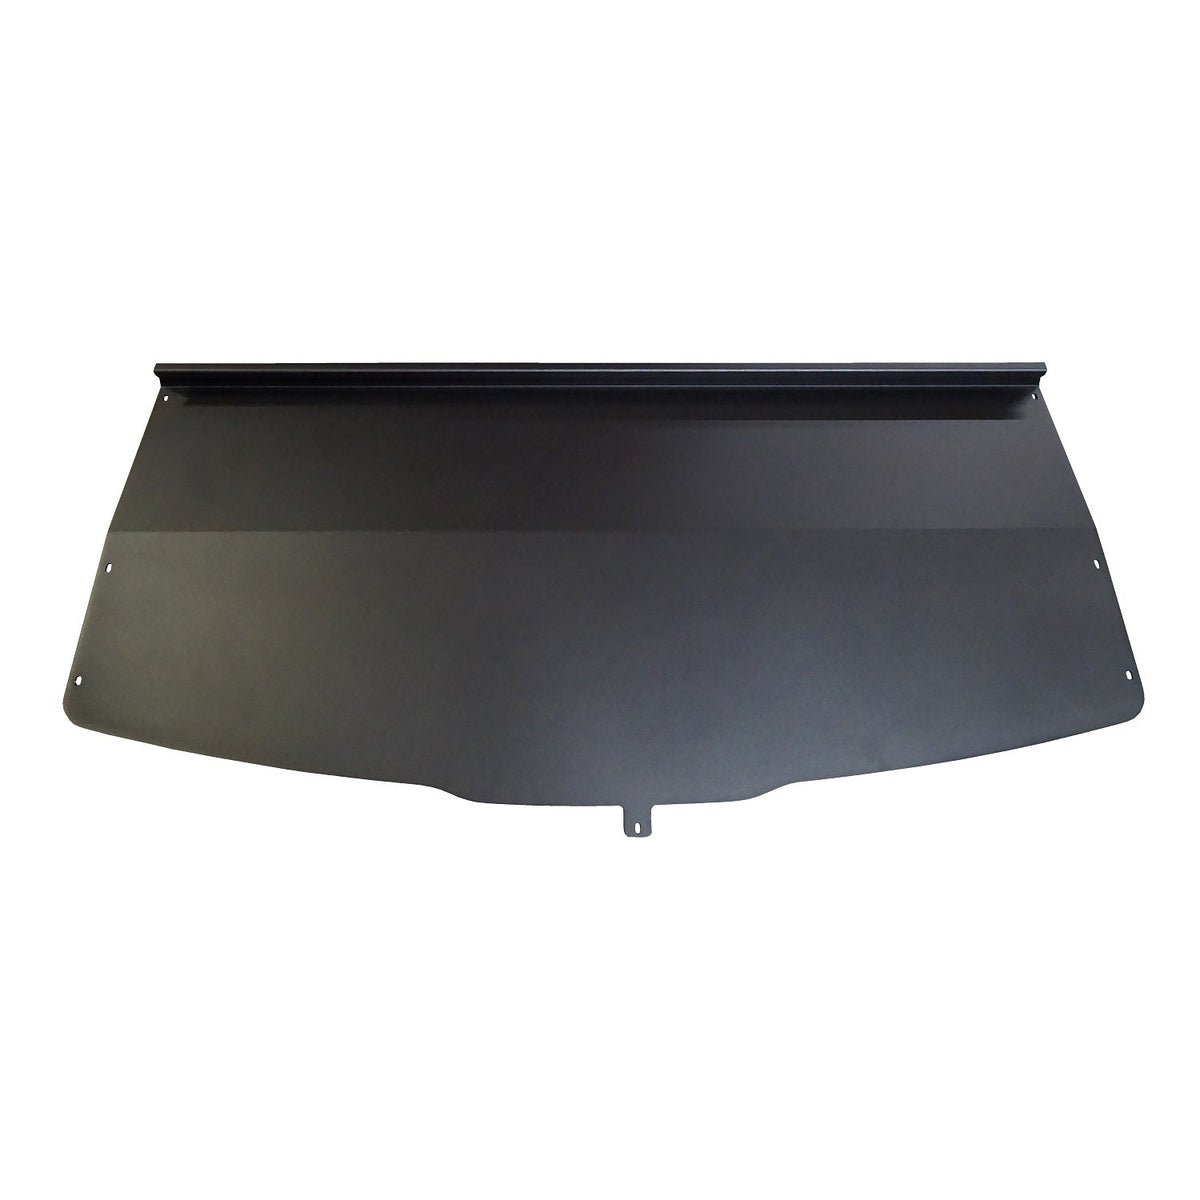 2021+ Ford Transit Headliner Shelf - Fits Mid and High Roof Vans